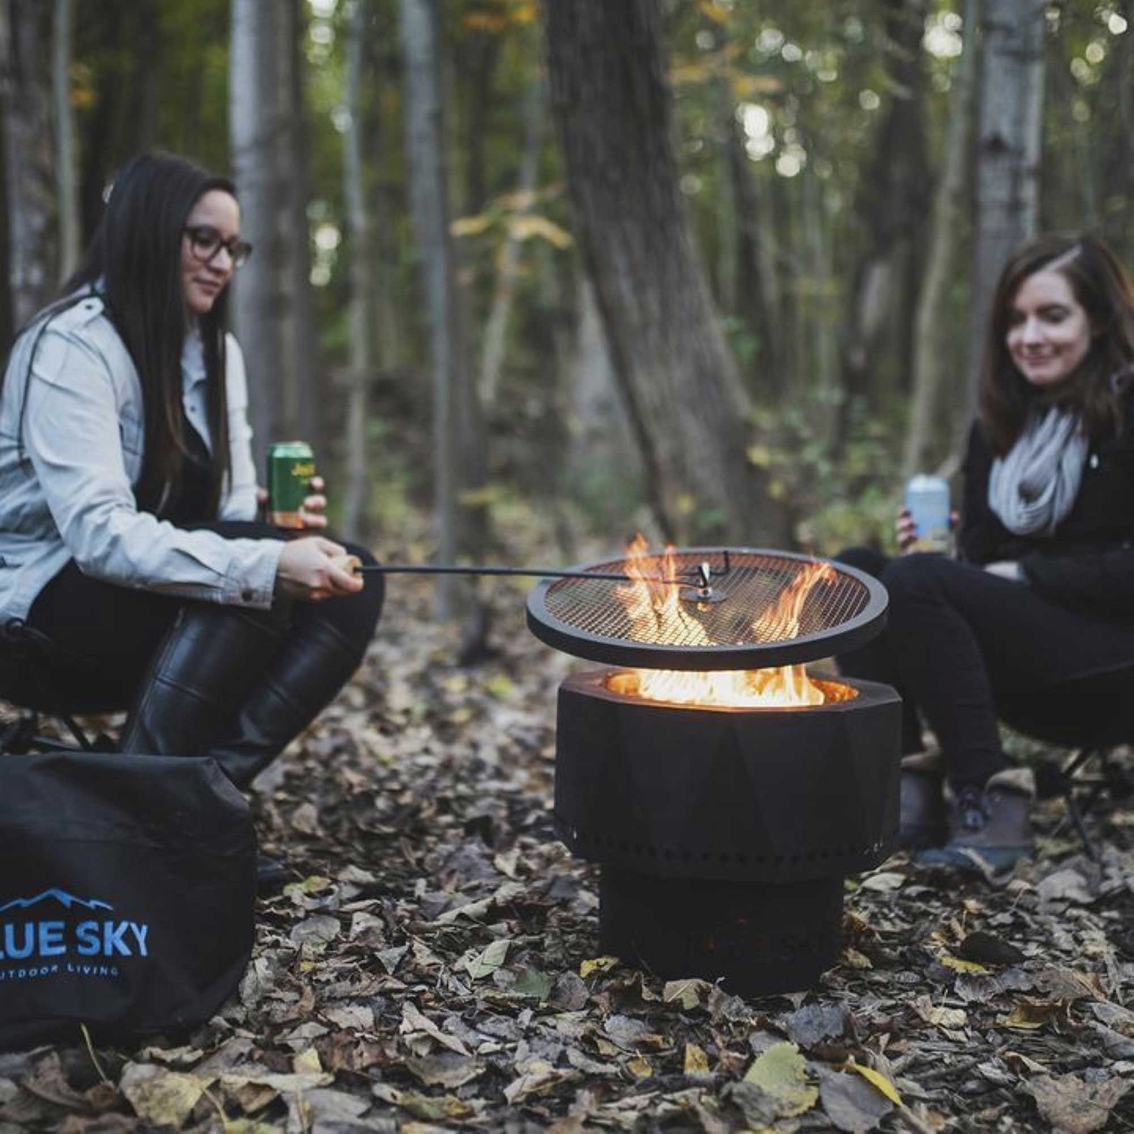 Blue Sky Outdoor Living Portable Steel Fire Pit - Image 3 of 4